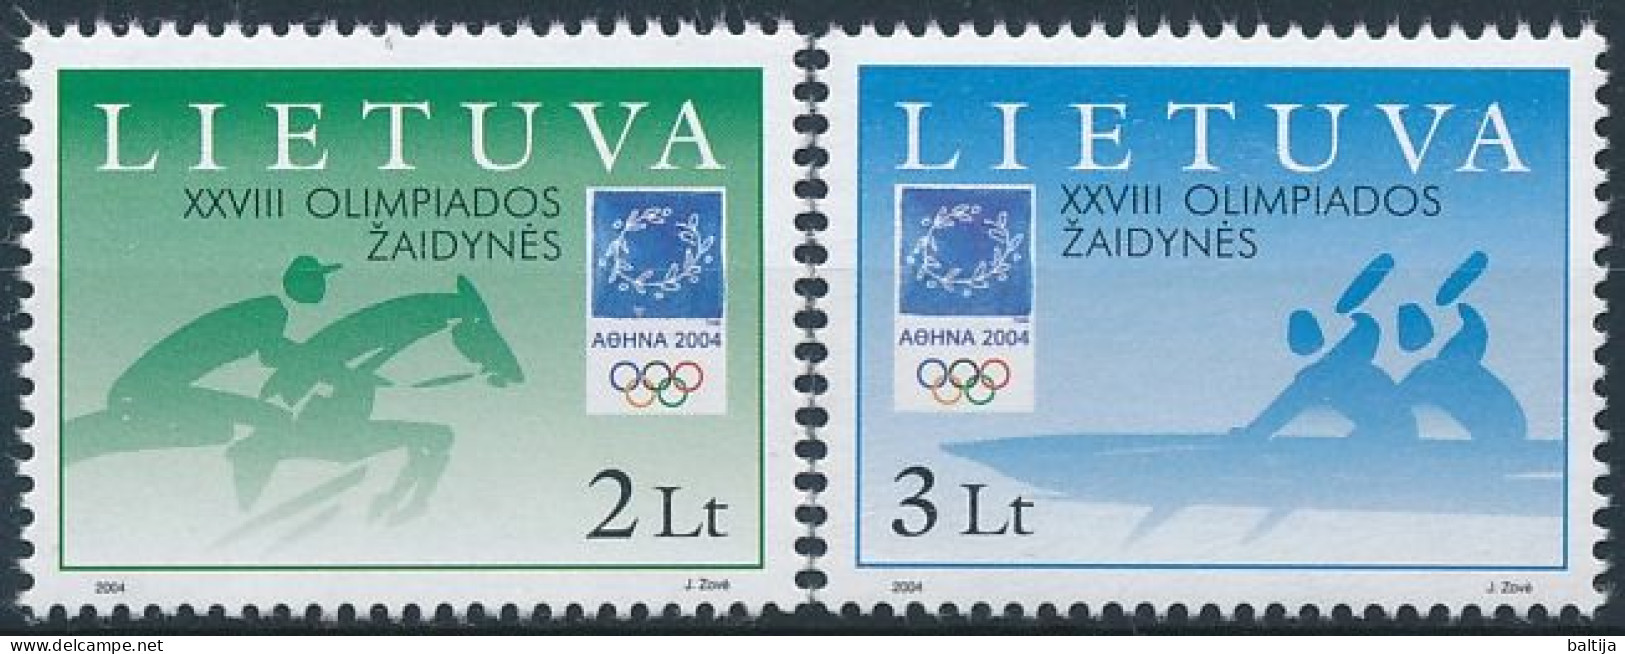 Mi 855-856 ** MNH / Summer Olympics, Athens, Greece, Equestrian Show Jumping, Water Sports - Lithuania